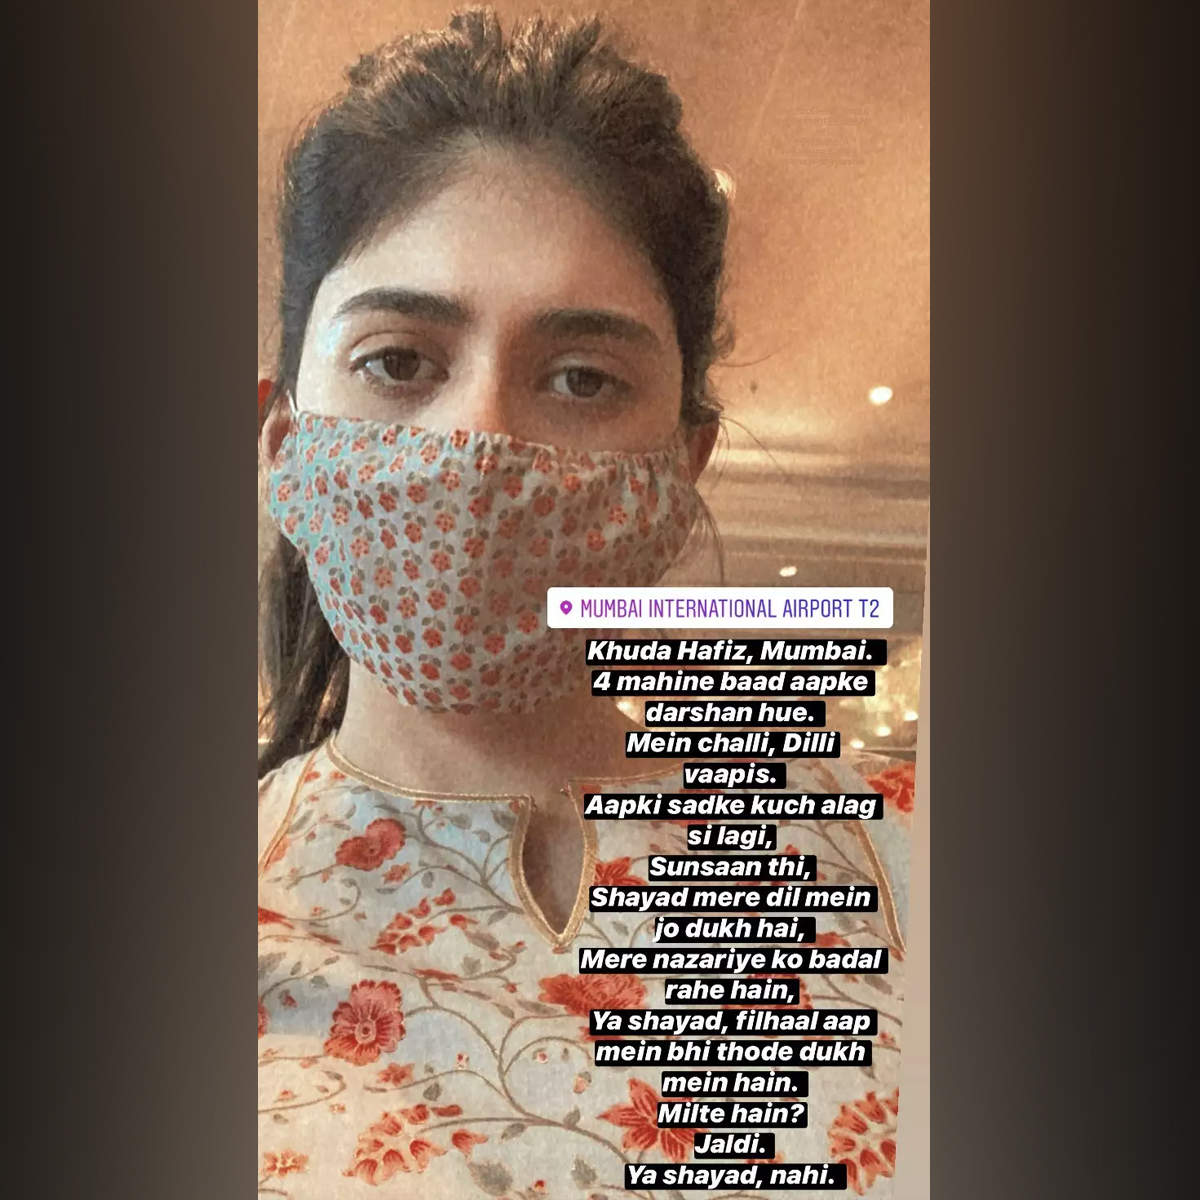 Sushant Singh Rajput’s ‘Dil Bechara’ co-star Sanjana Sanghi gives her statement to Mumbai Police and leaves Mumbai; hinting at never returning 9